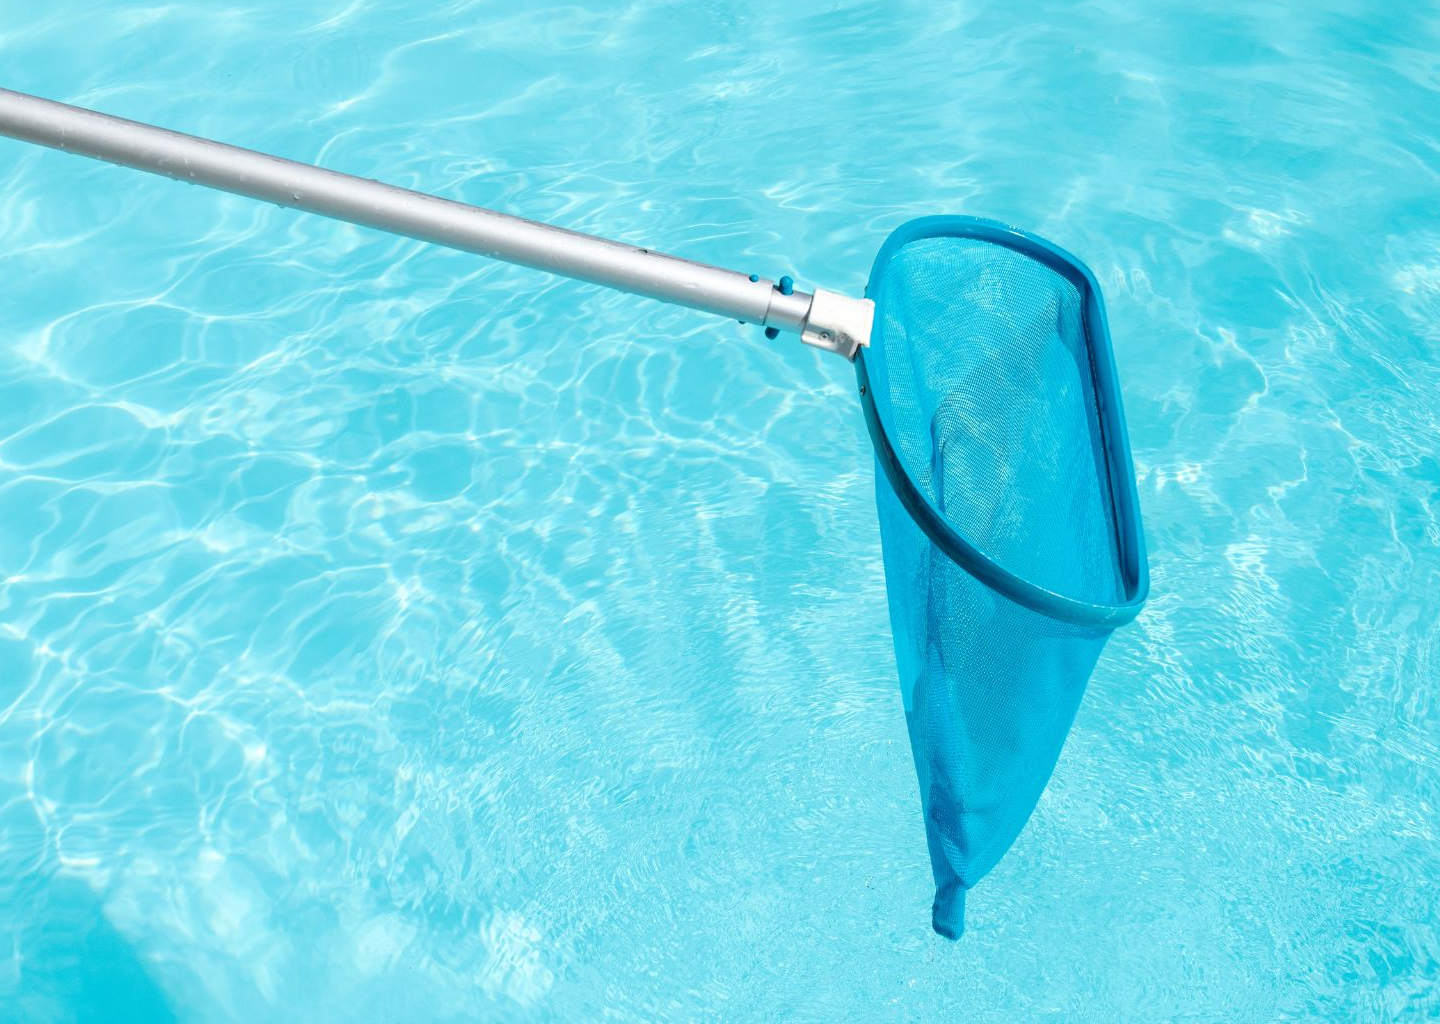 Tips for cleaning pool